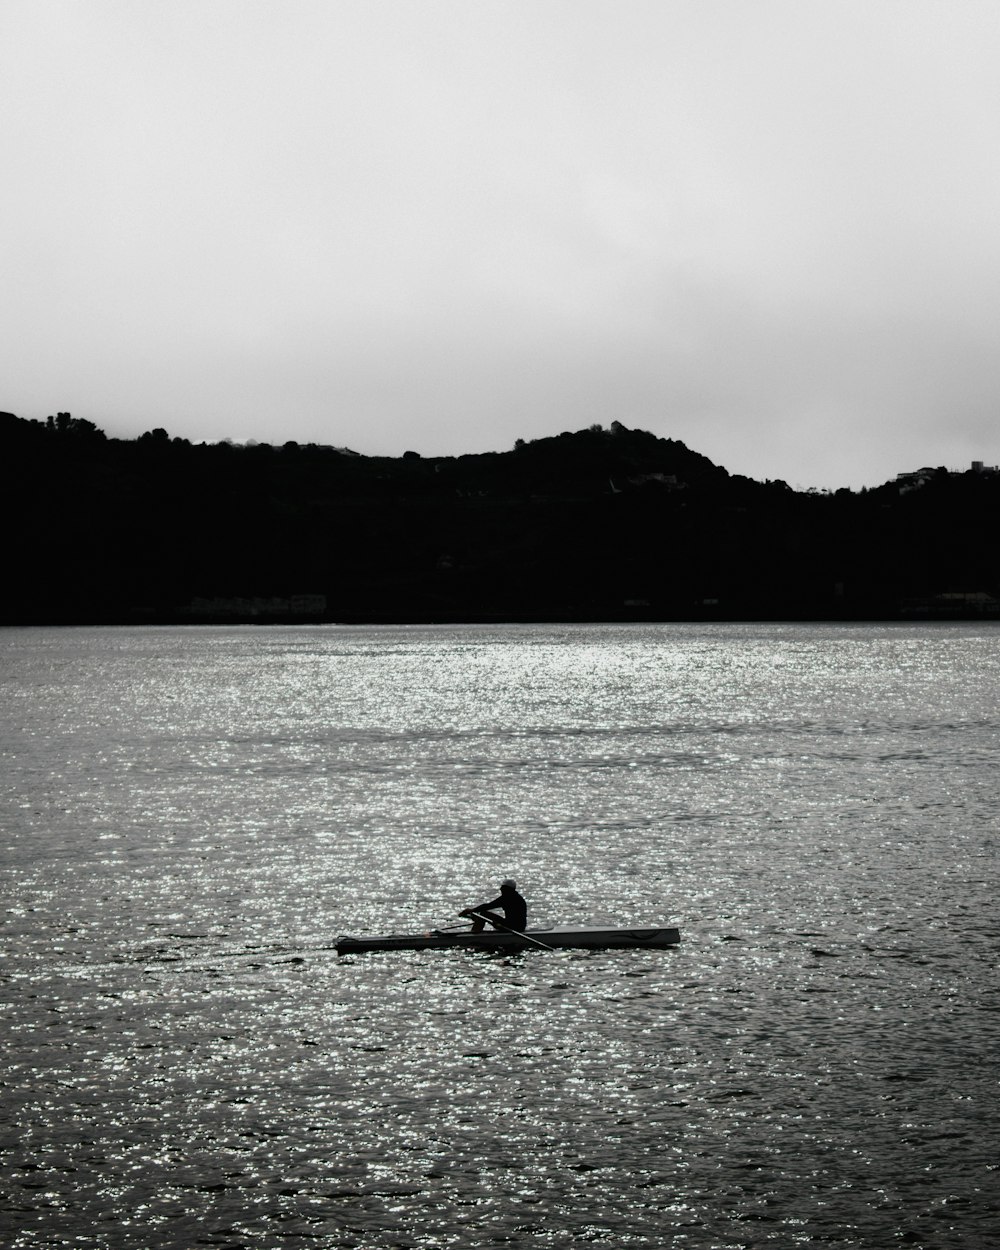 a person rowing a boat on a large body of water